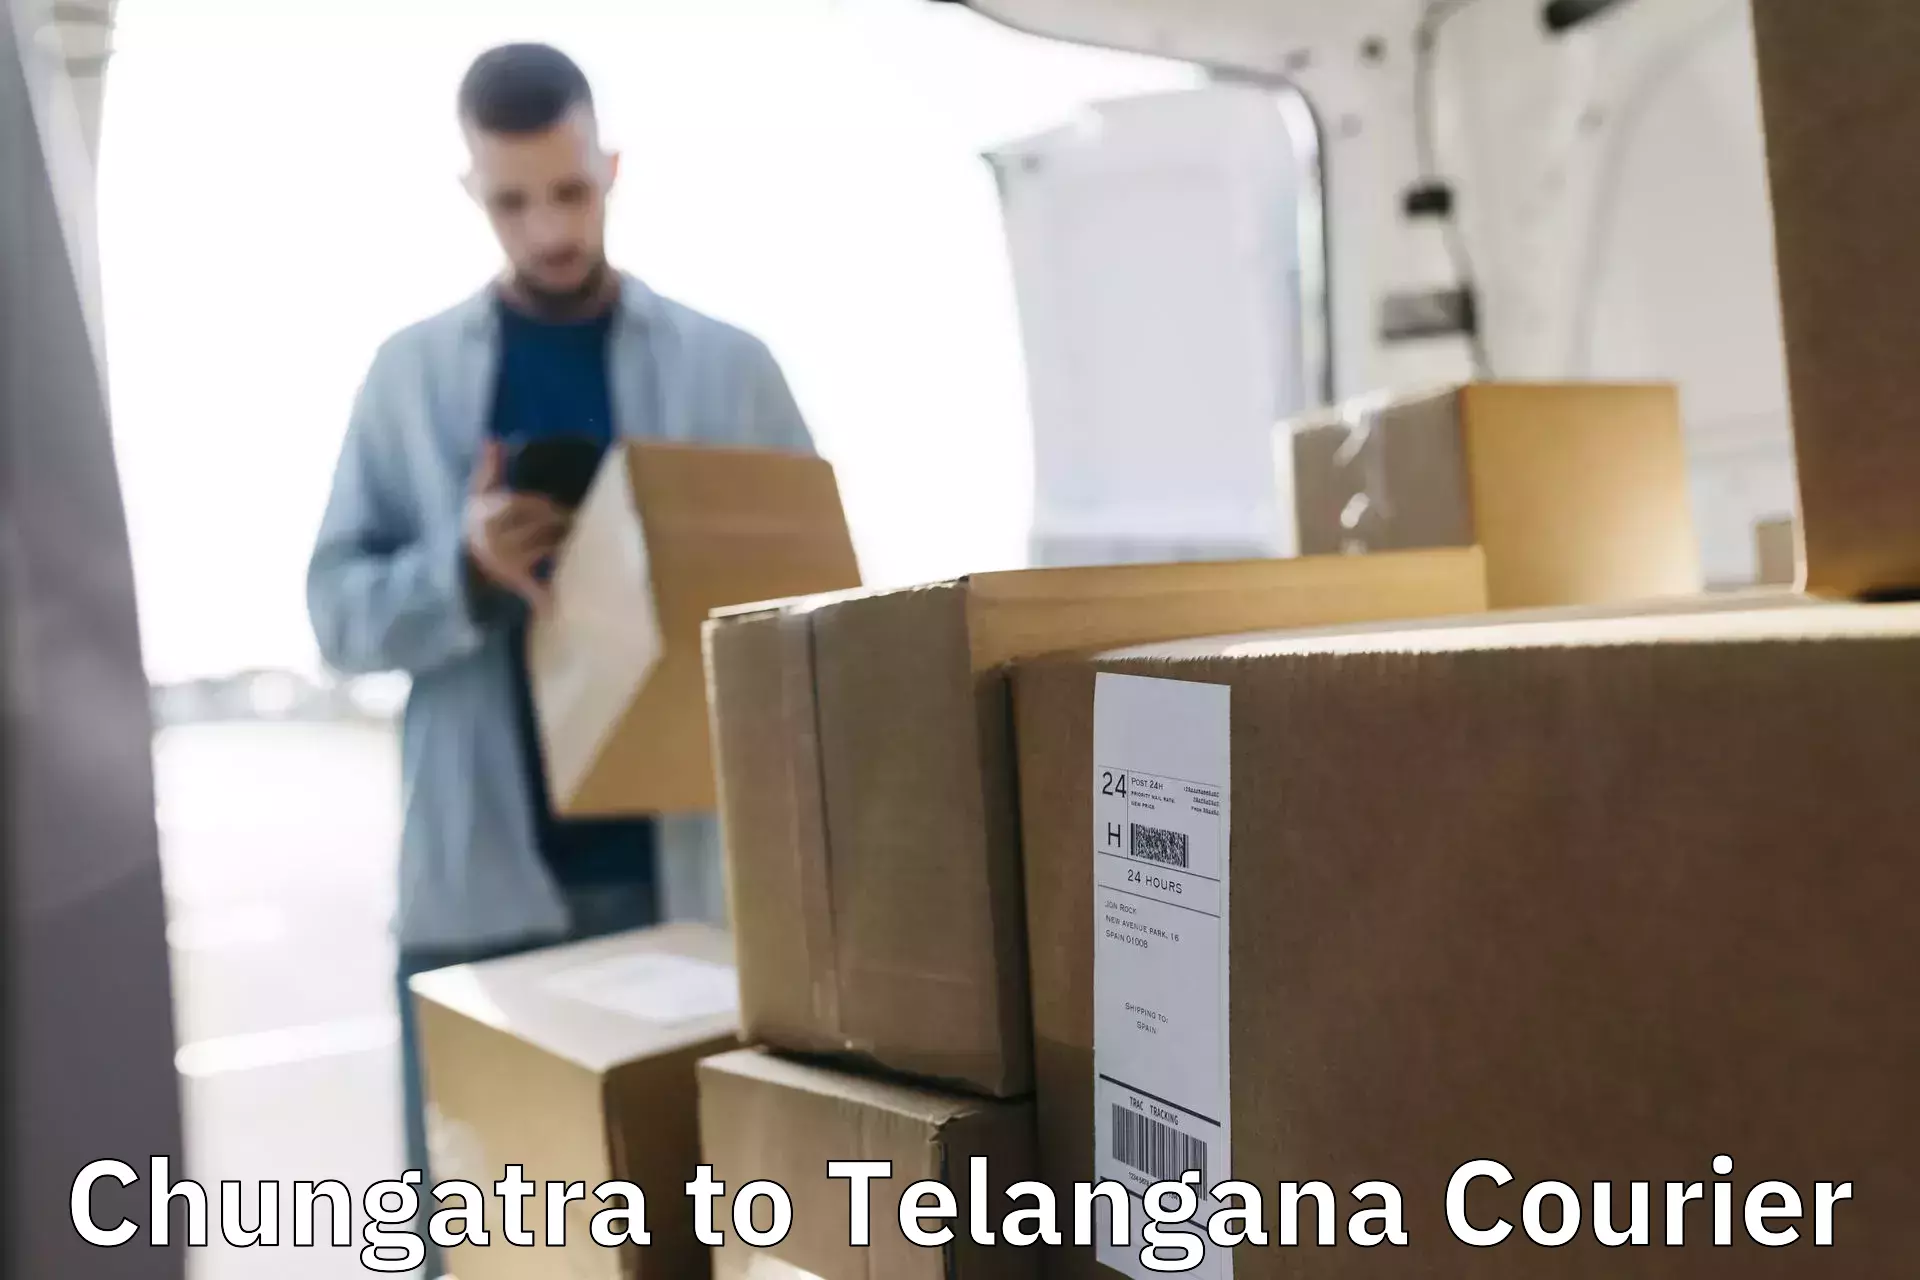 Secure packaging in Chungatra to Sultanabad